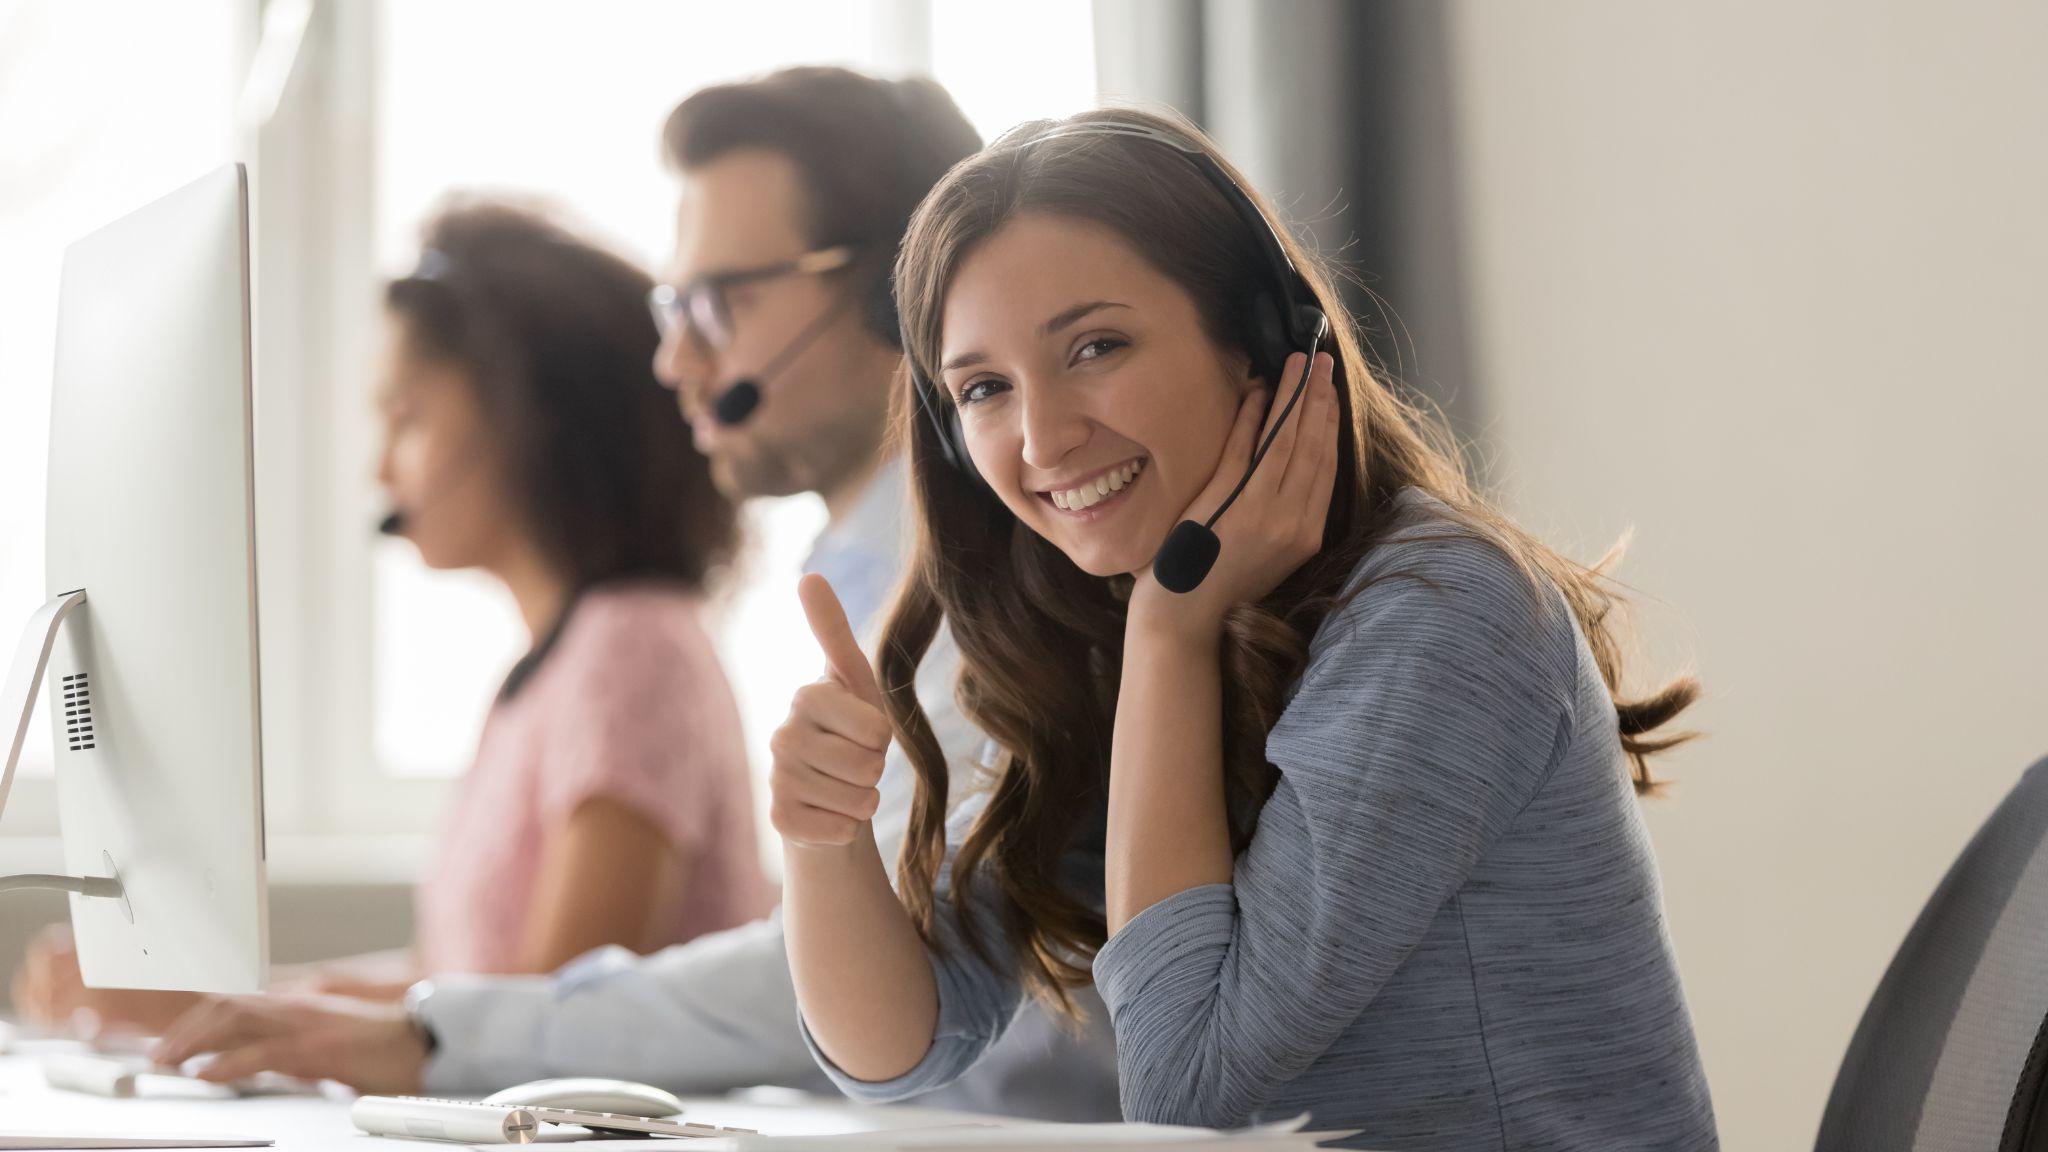 Smiling woman call center operator in headset showing thumbs up gesture